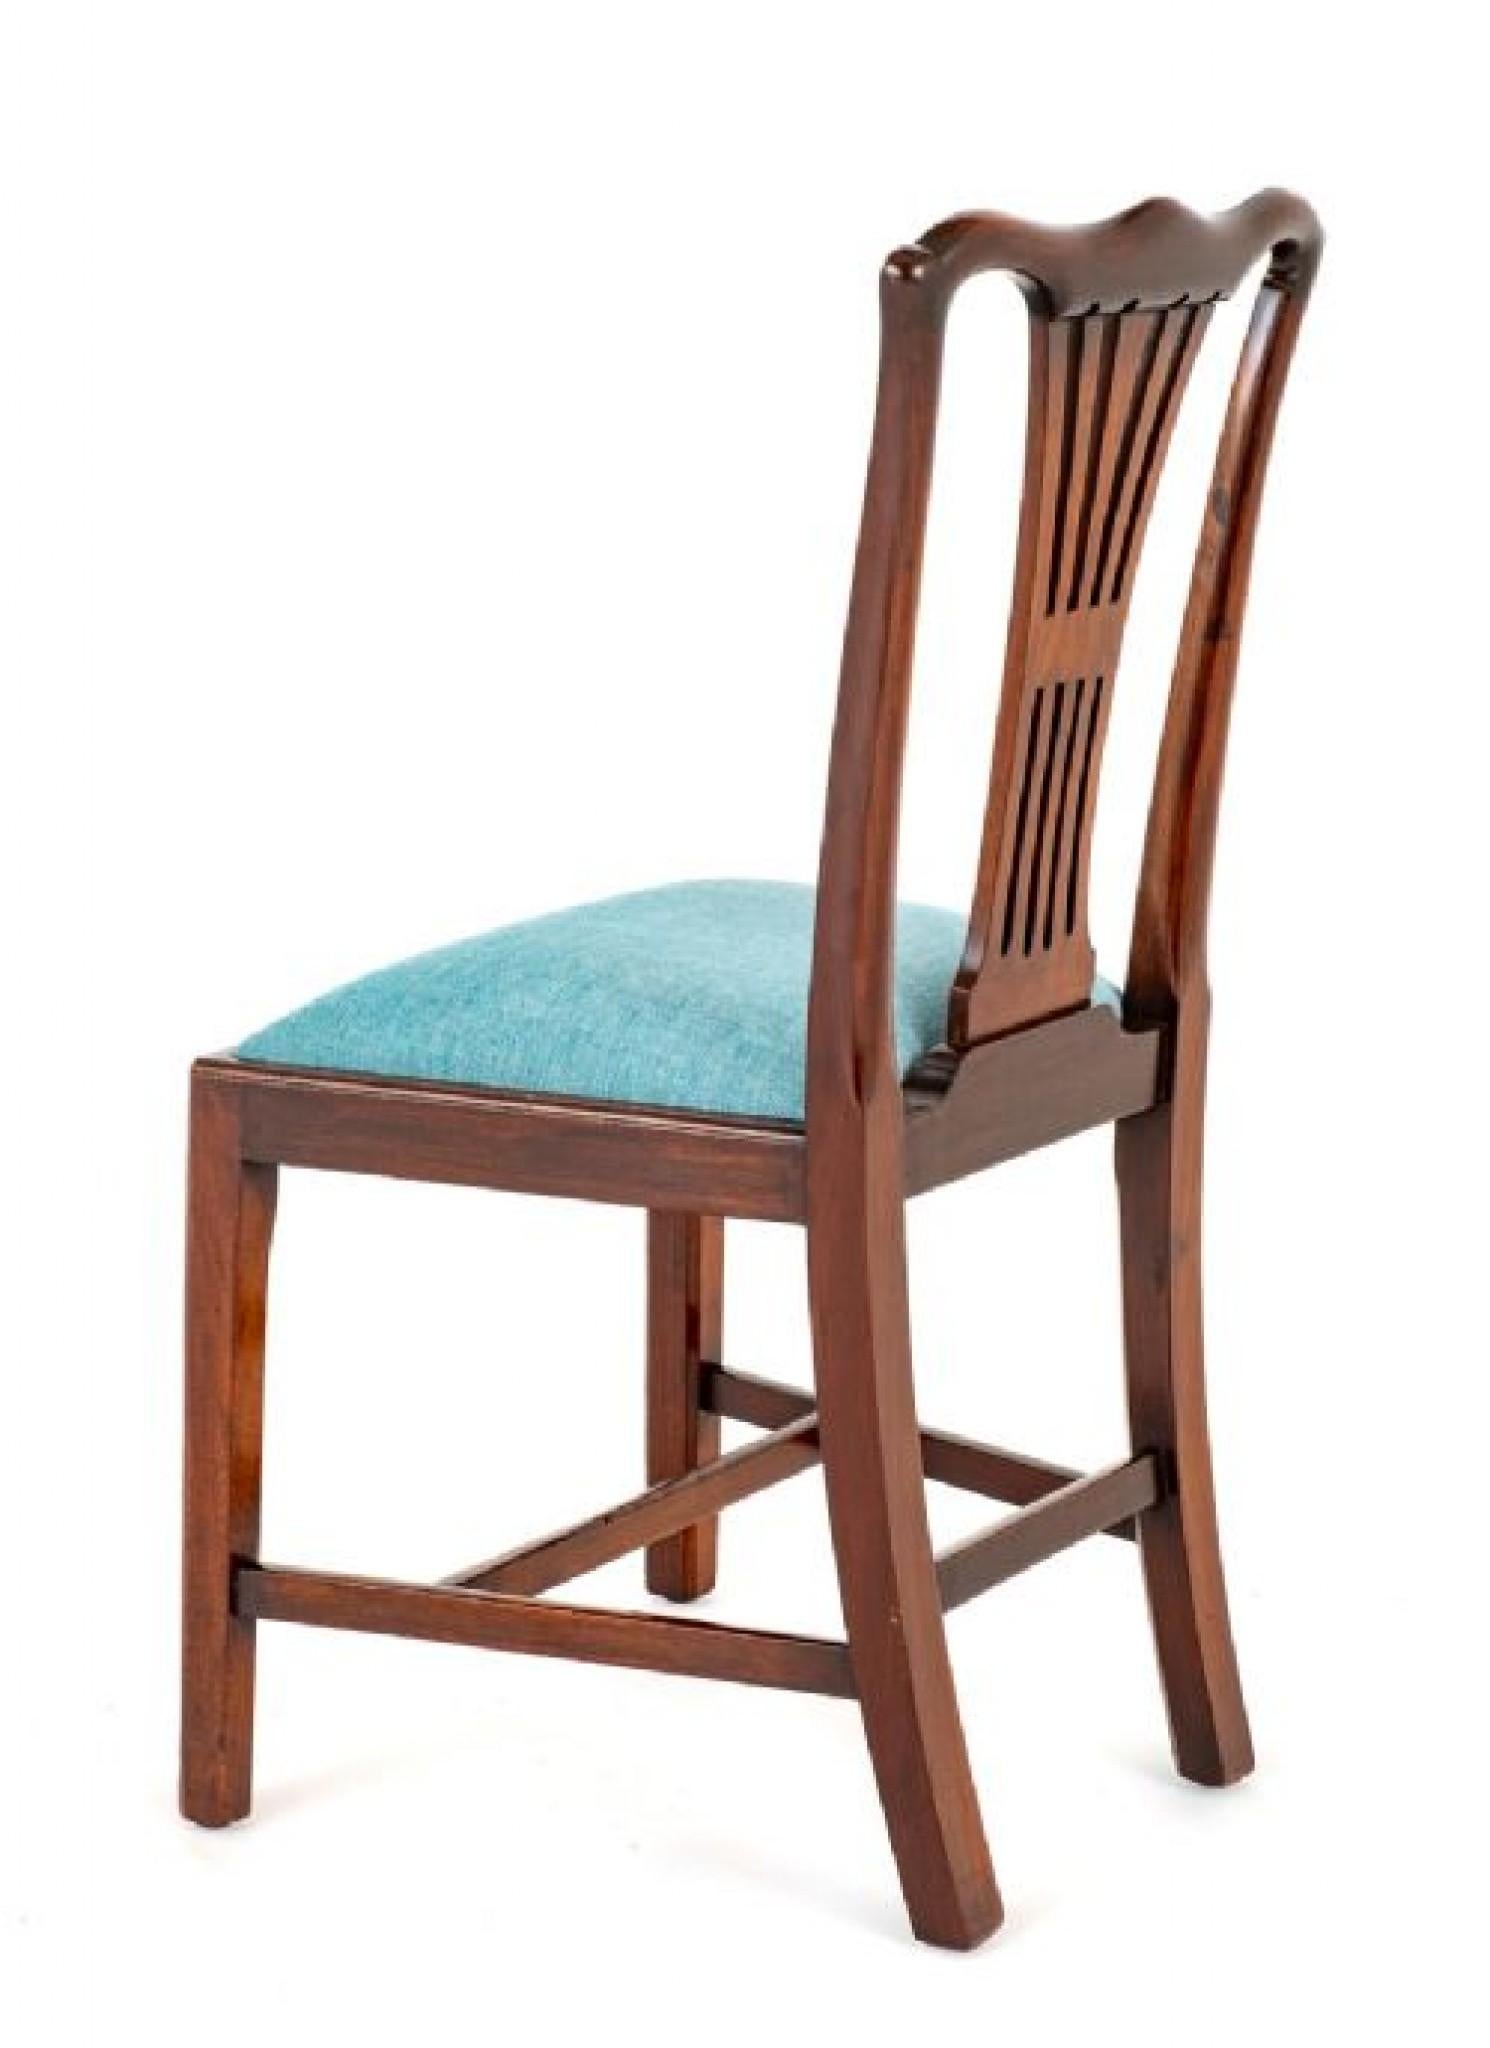 Set of 12 (10 + 2) mahogany chippendale style dining chairs.
These chairs stand upon square front legs with swept back legs and an 